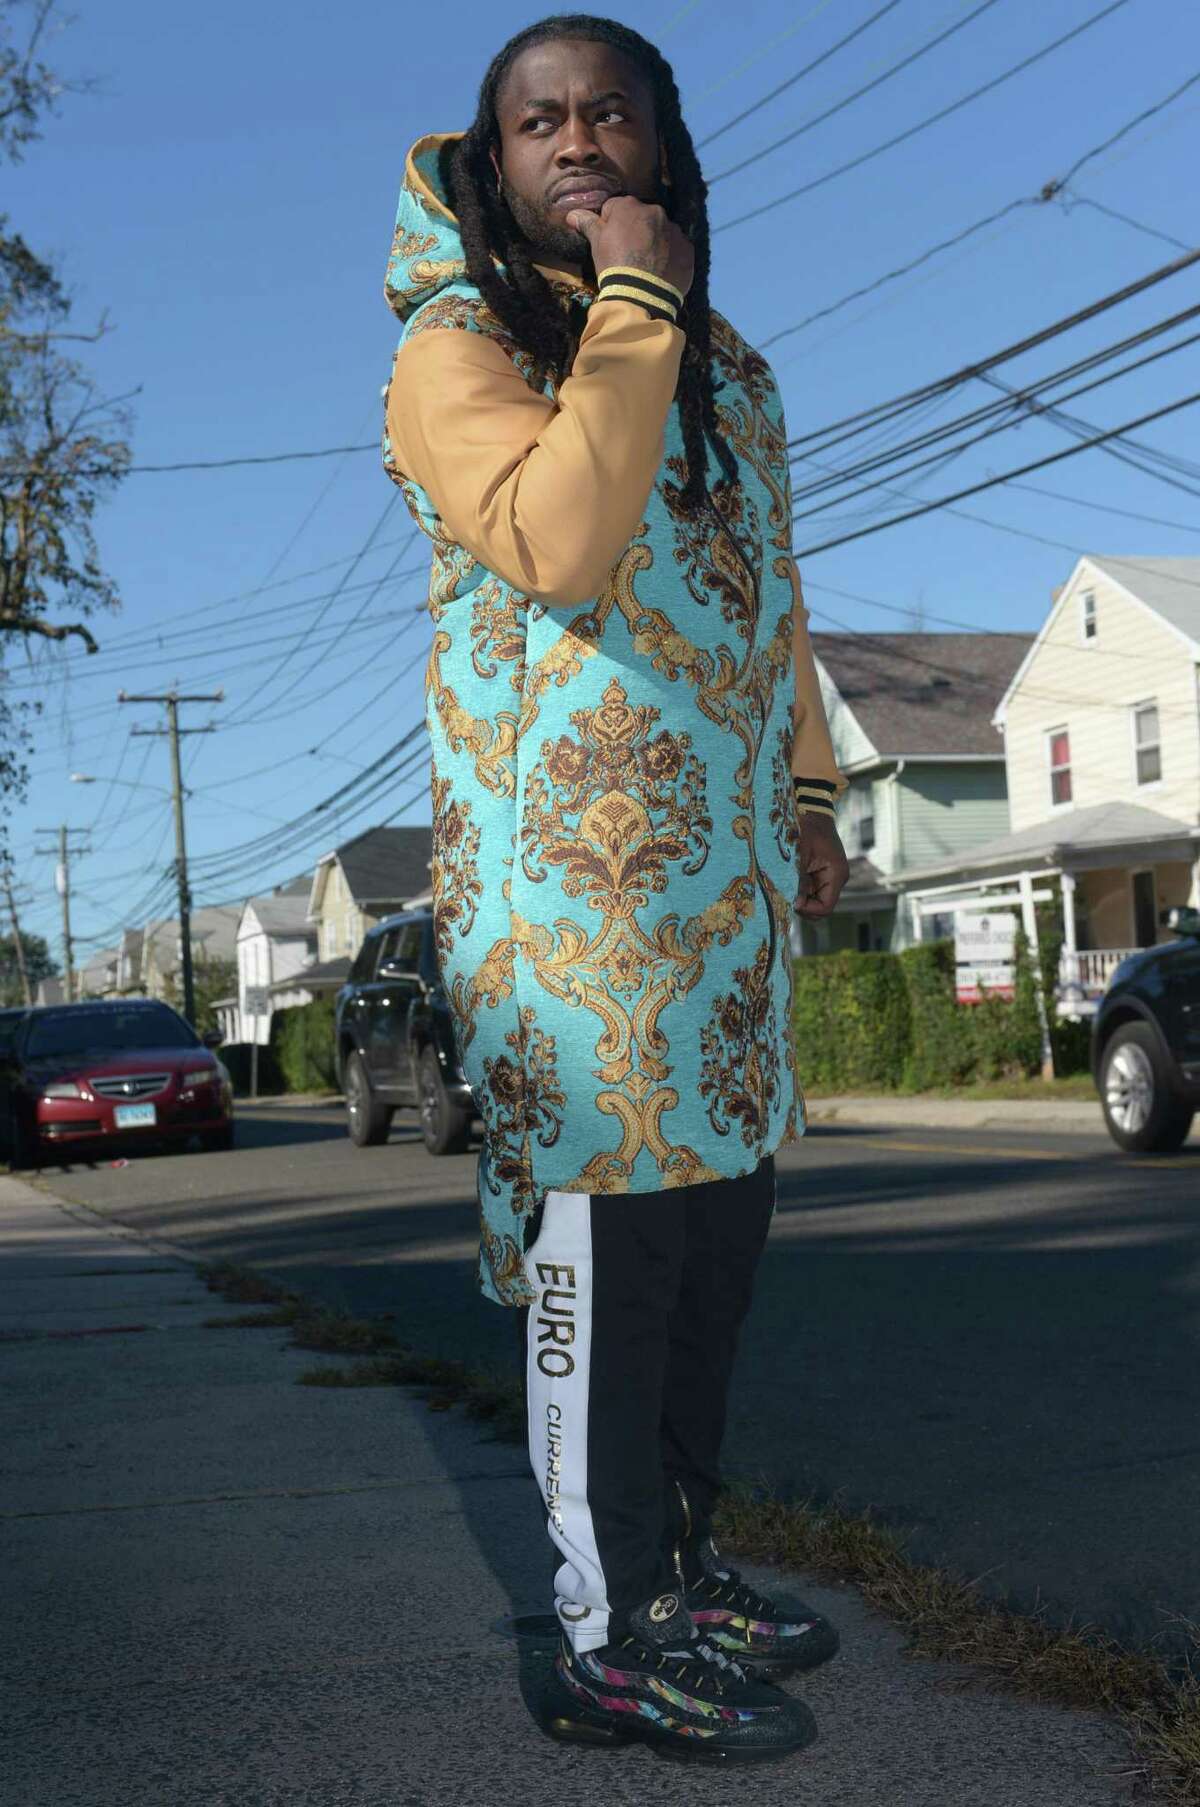 Devon Spencer, founder of EuroCurrensy clothing, outside his childhood home on Woodward Avenue Thursday, October 18, 2018, in Norwalk, Conn. Spencer was a standout on the Norwalk High School football team, was briefly homeless before starting his own clothing company, EuroCurrensy, which has been worn by rappers like Camron, Rick Ross and Cardi B.